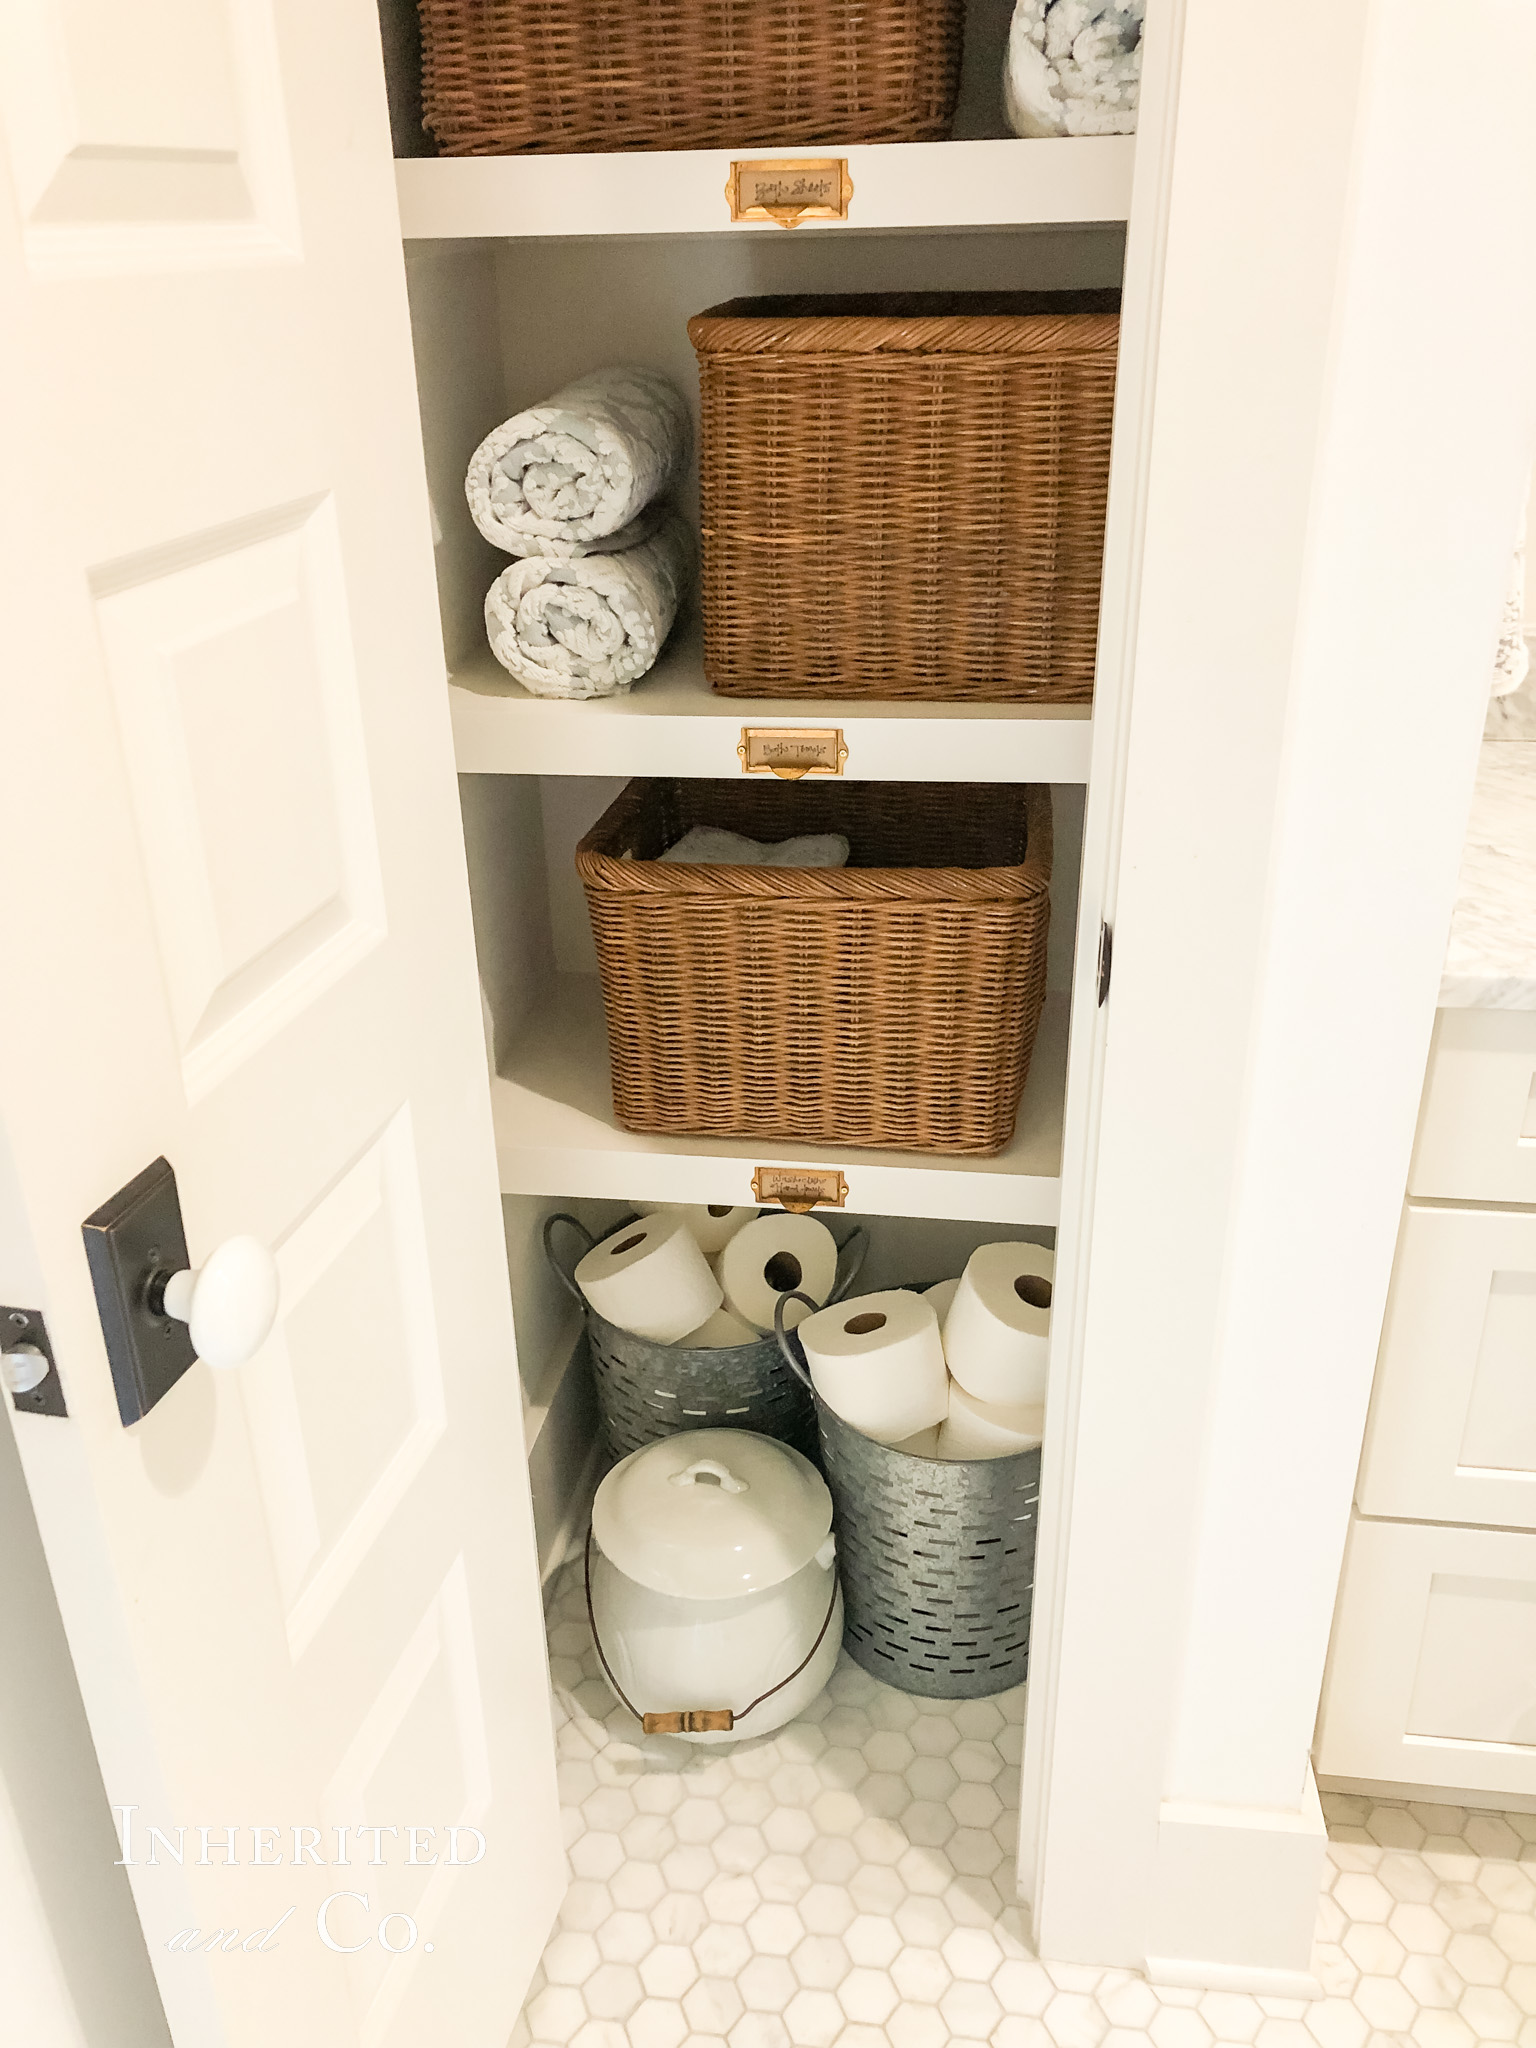 Bottom shelves, filled with baskets and ironstone, in an organized linen closet